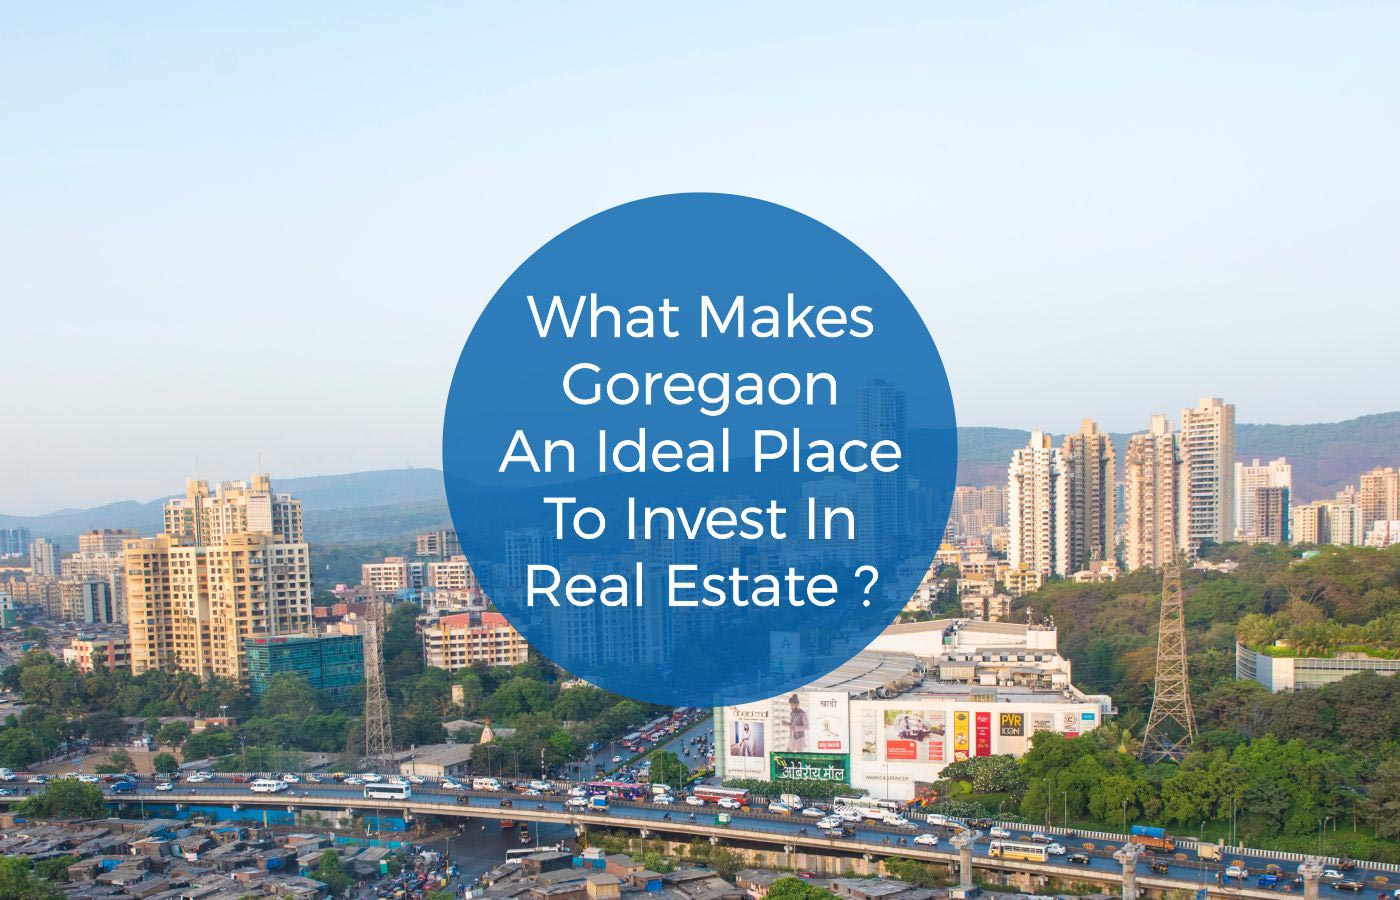 What Makes Goregaon an Ideal Place to Invest In Real Estate?